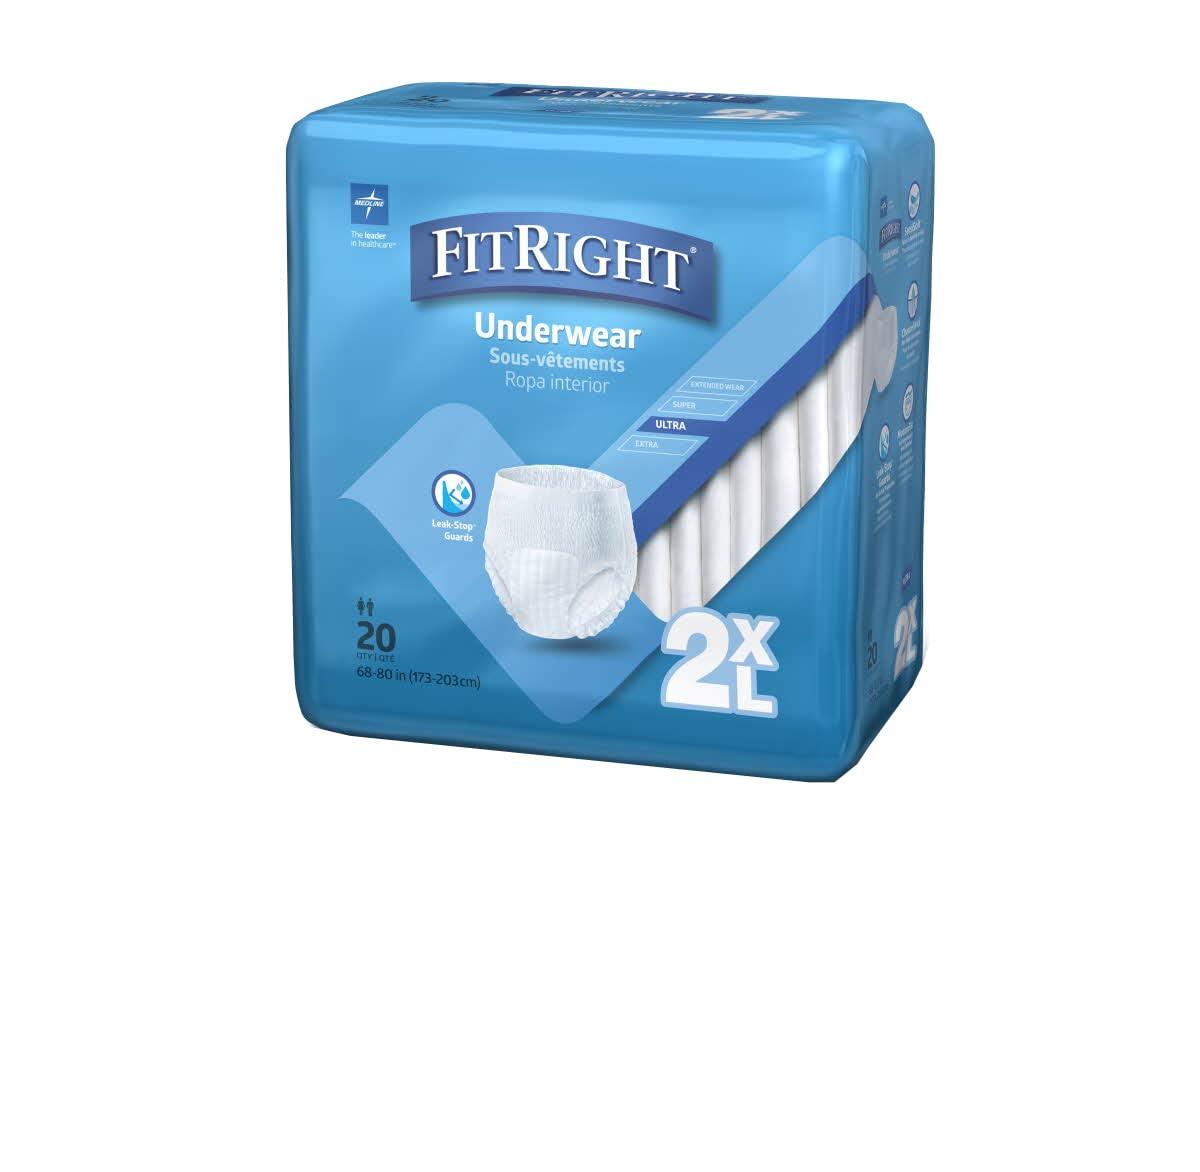 FitRight Adult Incontinence Underwear, Heavy Absorbency, XX-Large, 68-80  (20 Count) Bag of 20